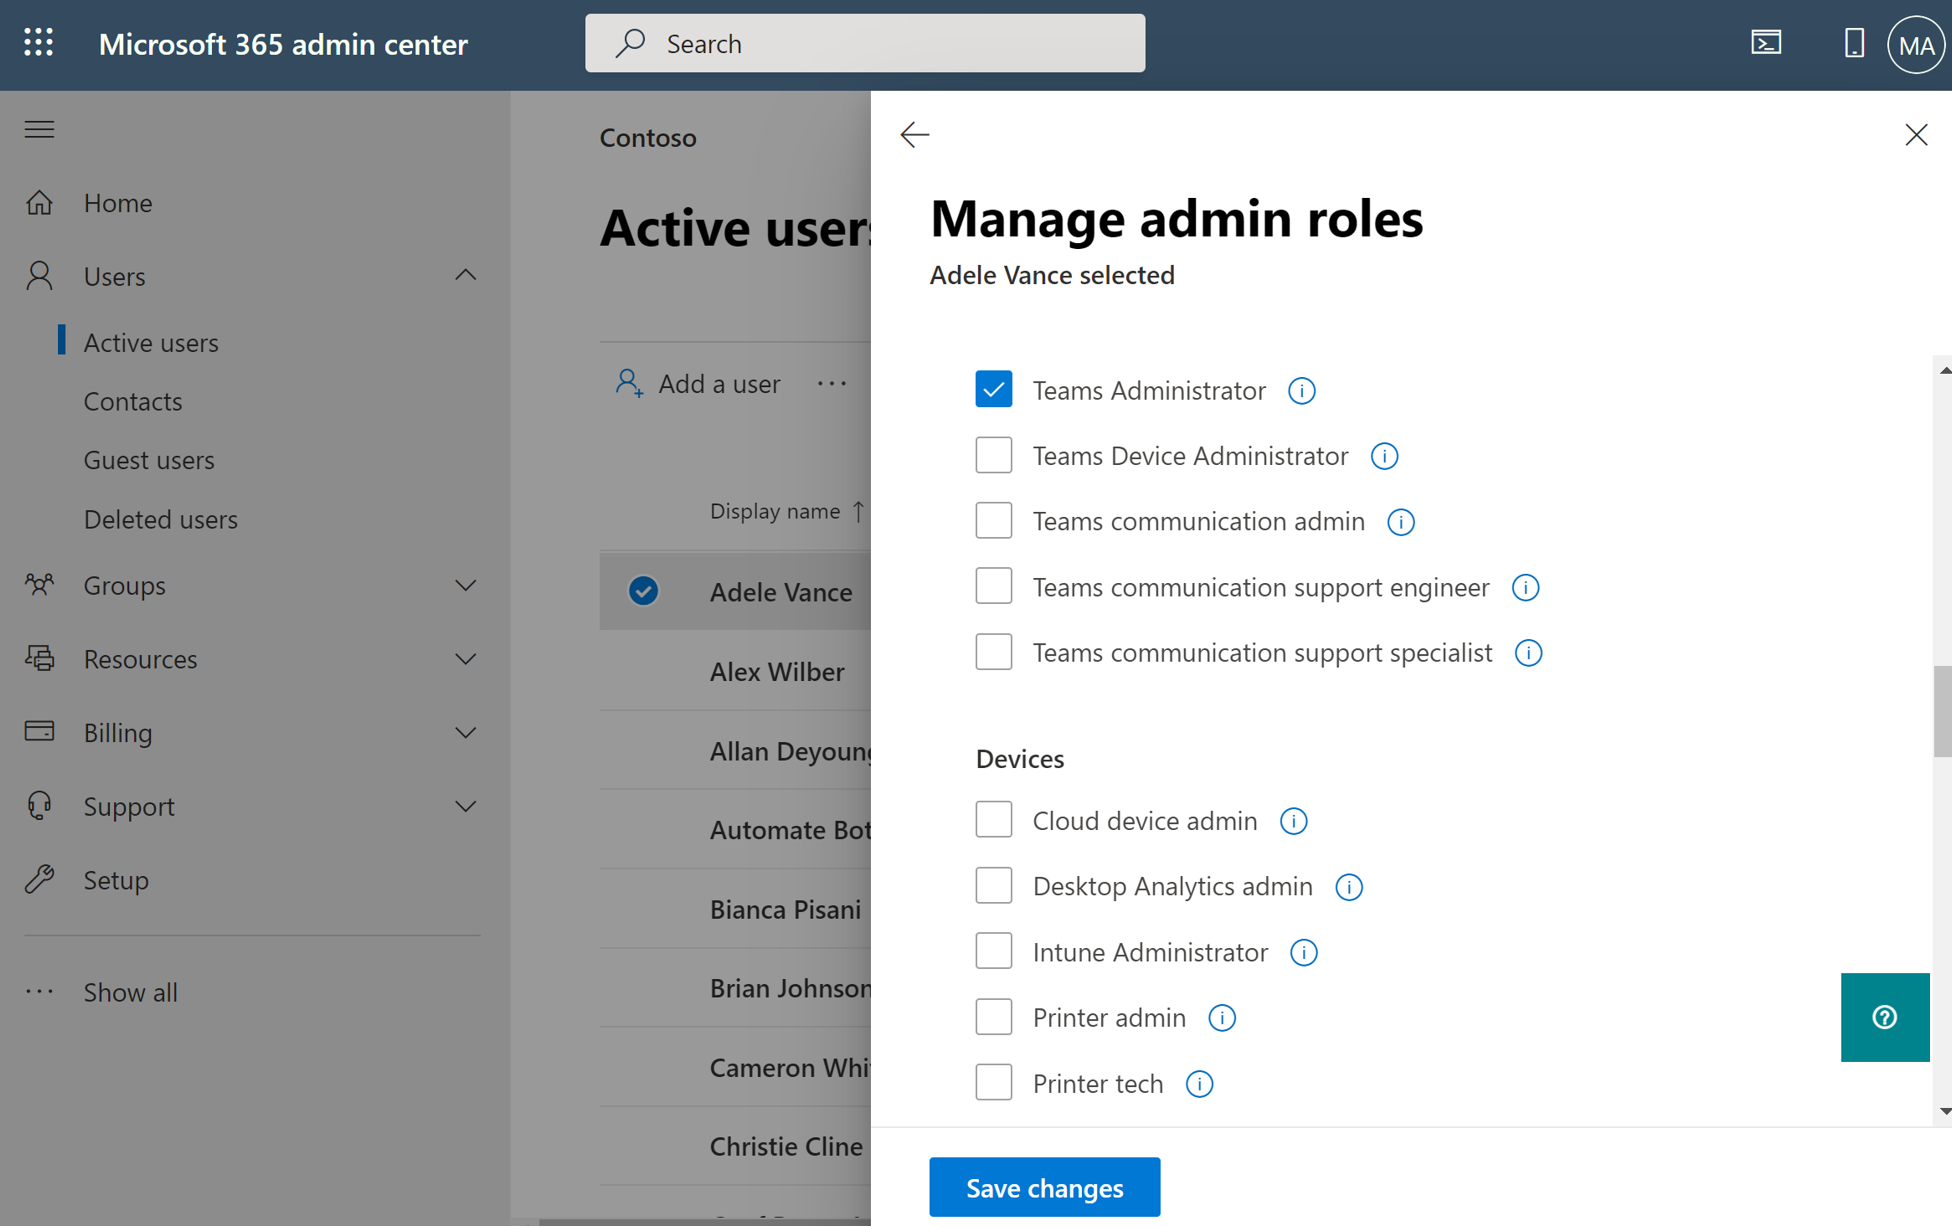 Screenshot of assigning Teams Admin Roles in M365 admin center.